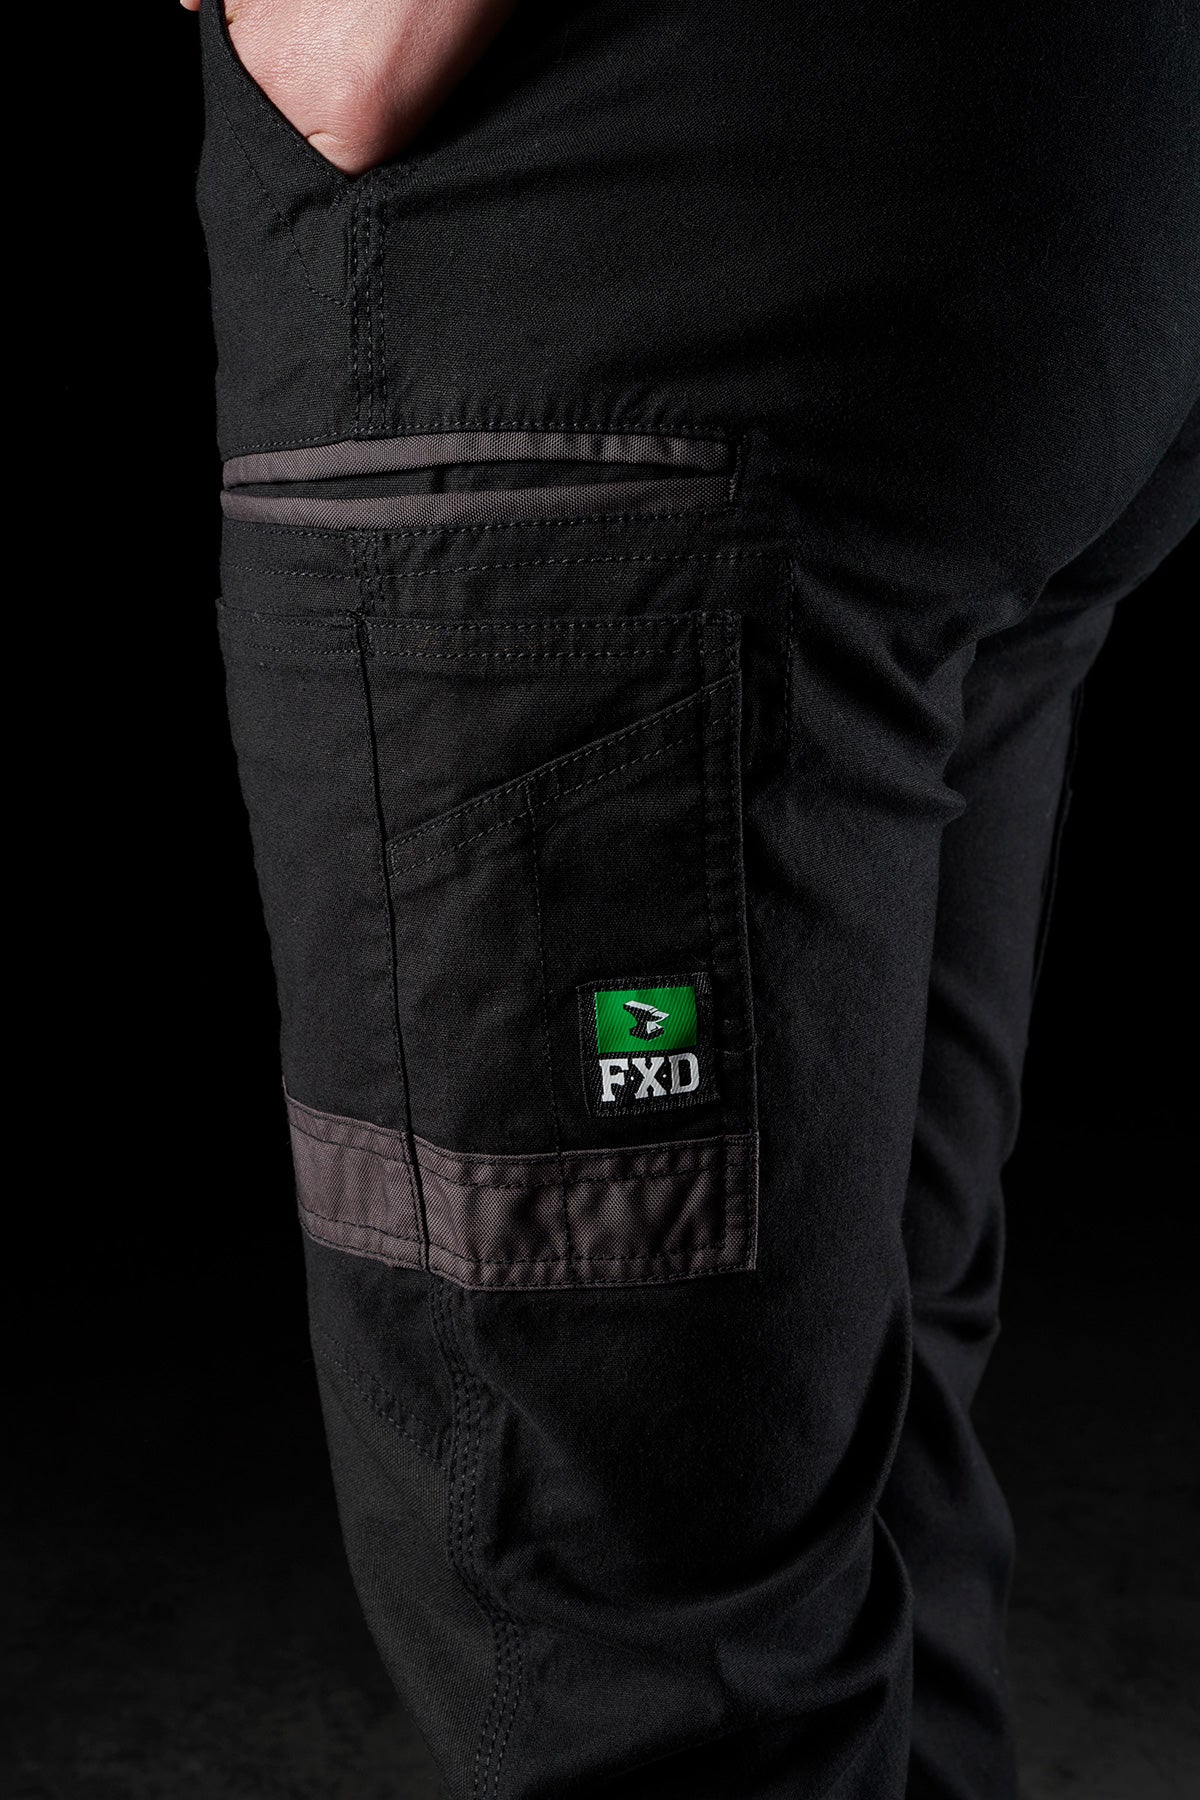 FXD WP-1™ Utility Work Pant from Highlands Workwear